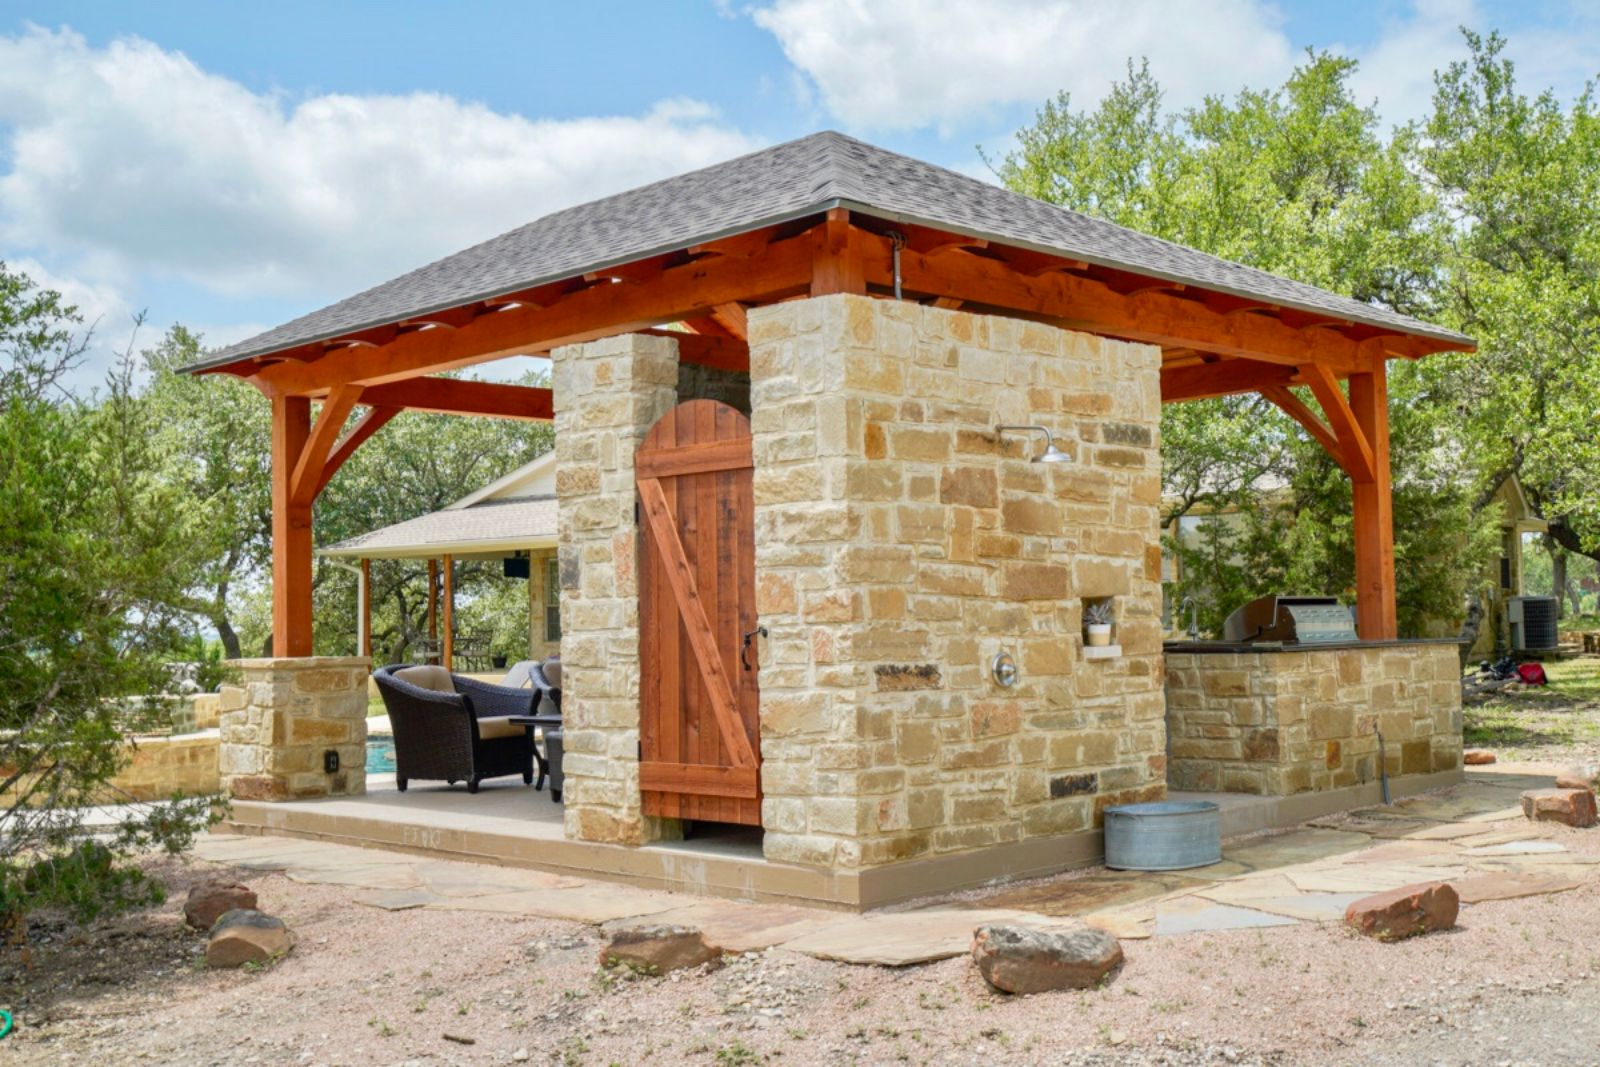 21x21, Outdoor Kitchen or Kitchen, Outdoor living, King Post Half Hip, shingle roof, Poolside or swimming pool, residential, pool house, cabana, Austin, Dripping Springs, Cement or concrete pad, patio furniture, entertaining